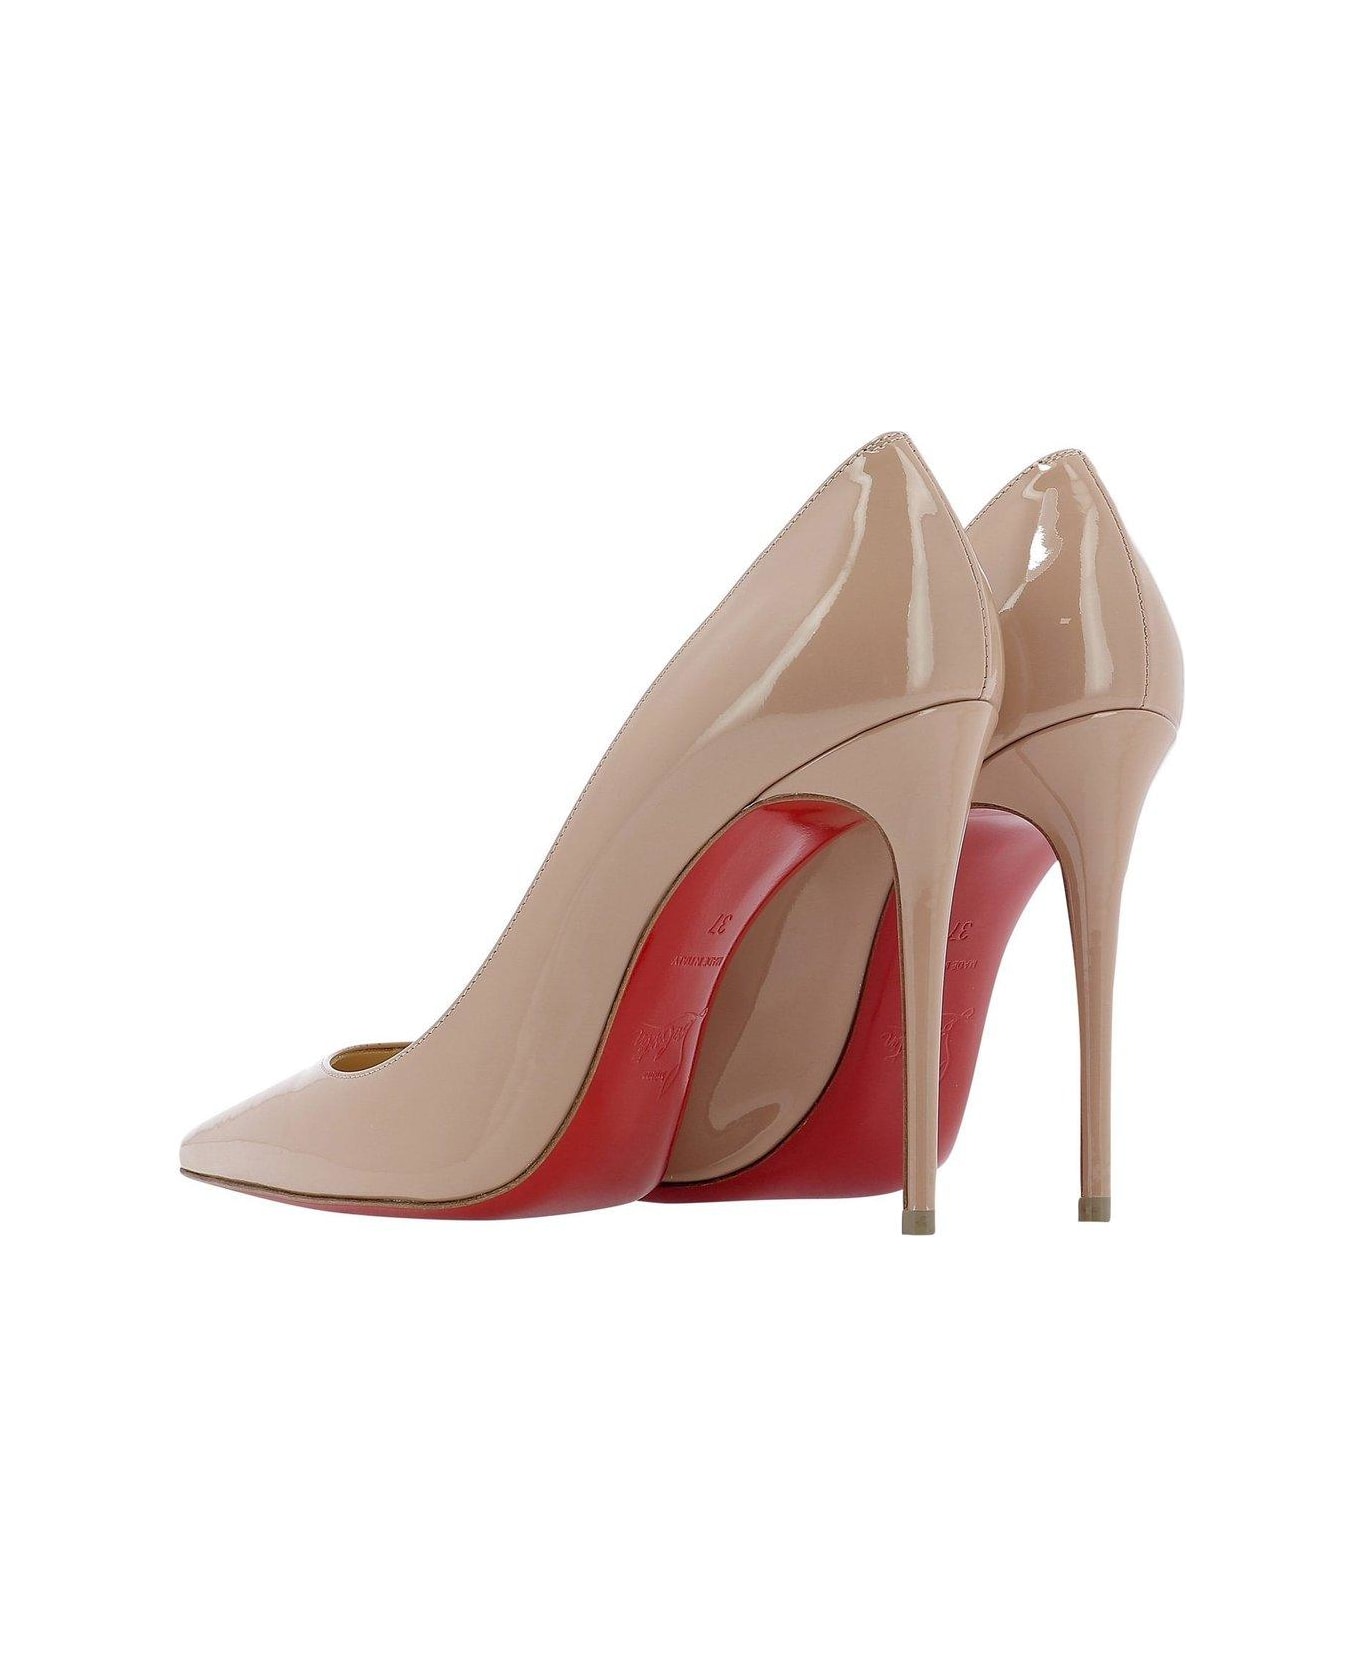 Christian Louboutin Kate Pointed-toe Pumps - Nude & Neutrals